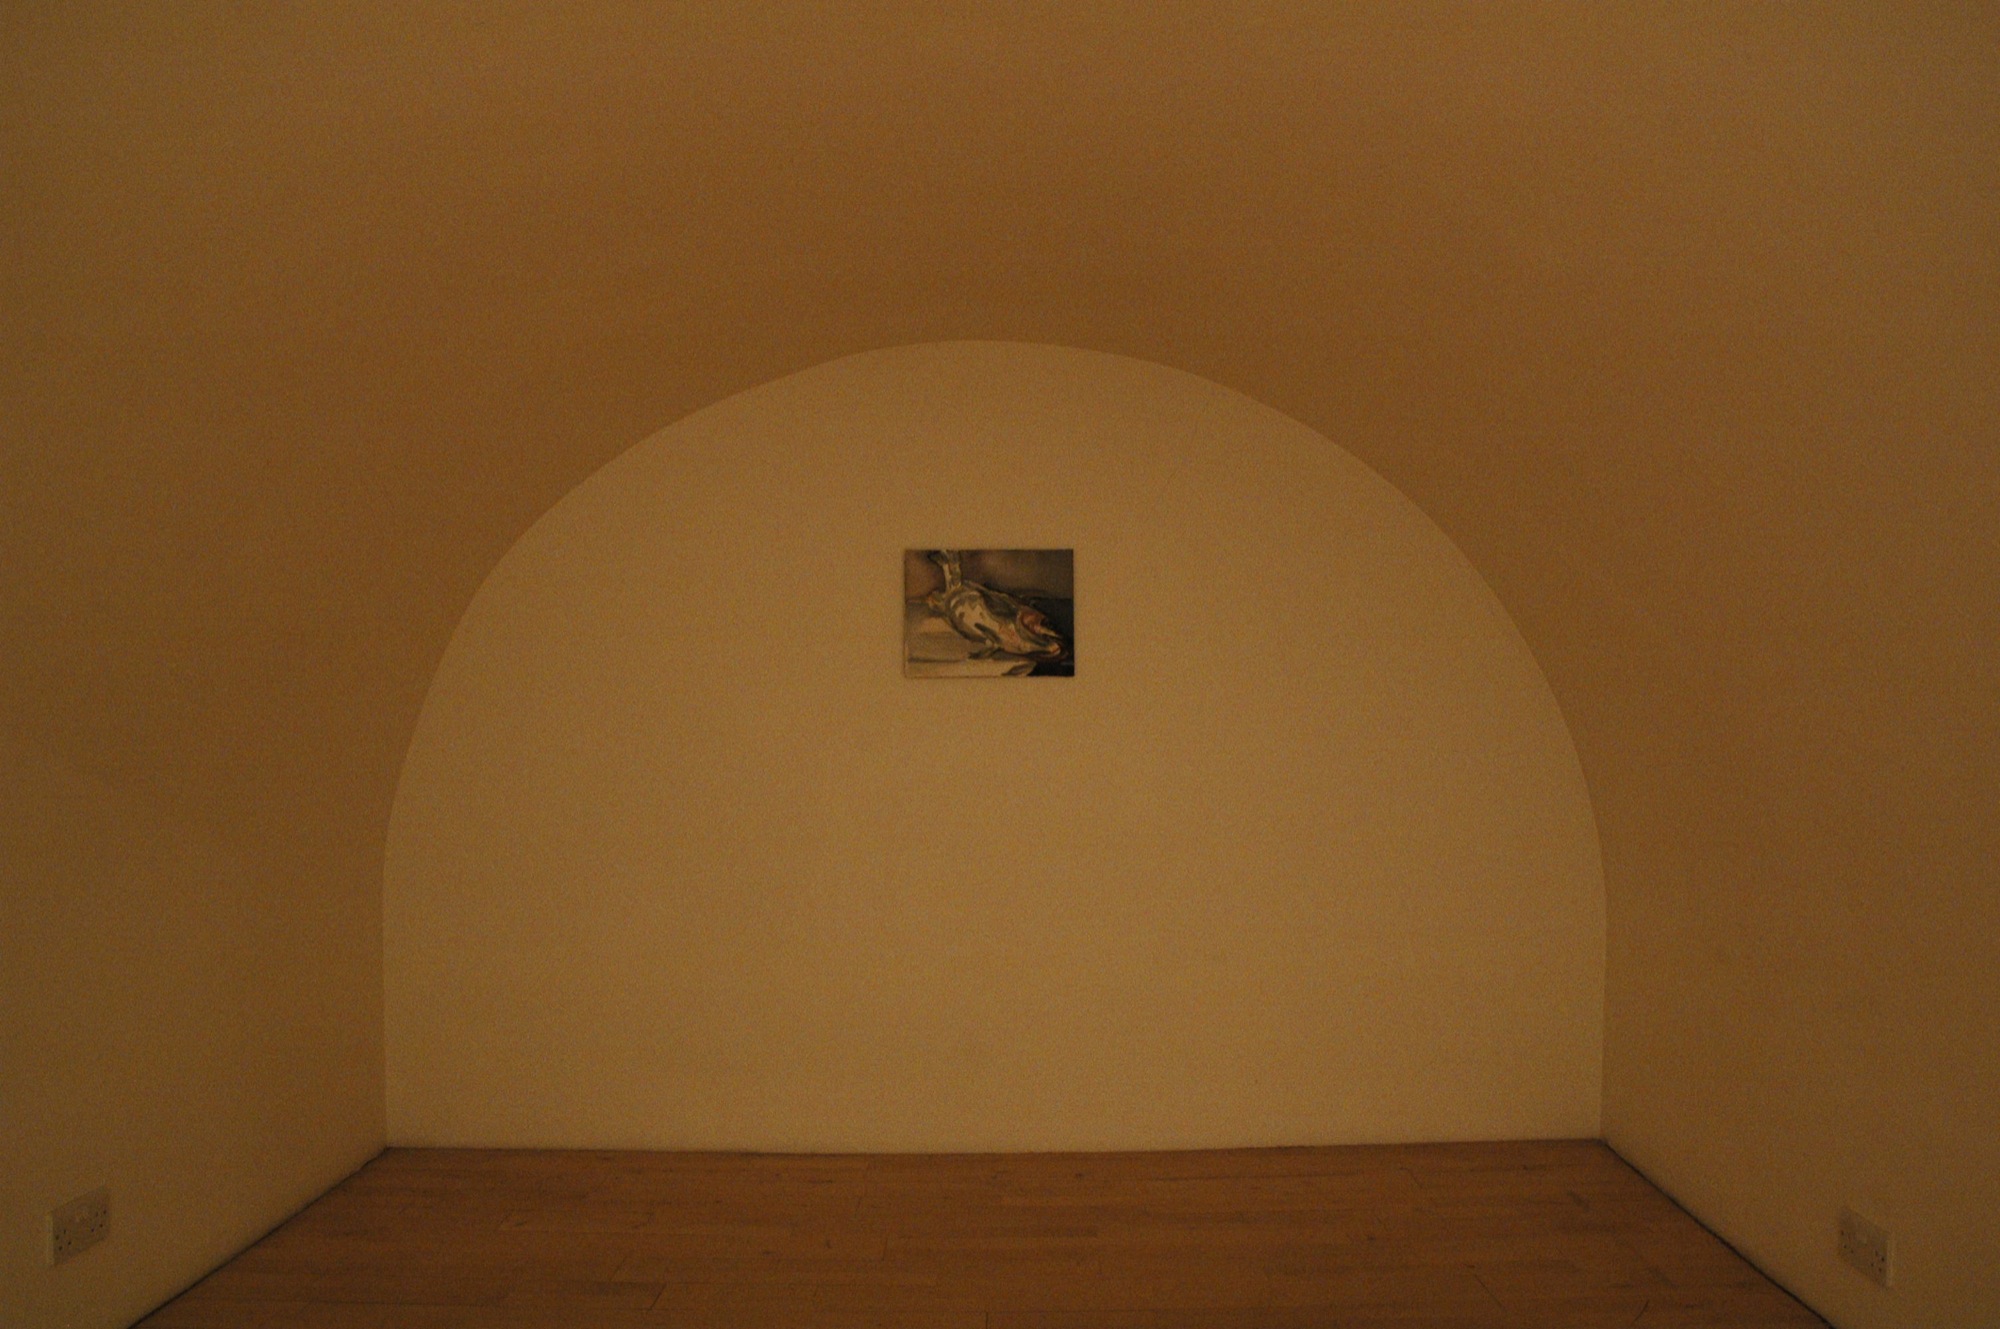 Frith Street Gallery, The Second Coming, 2004